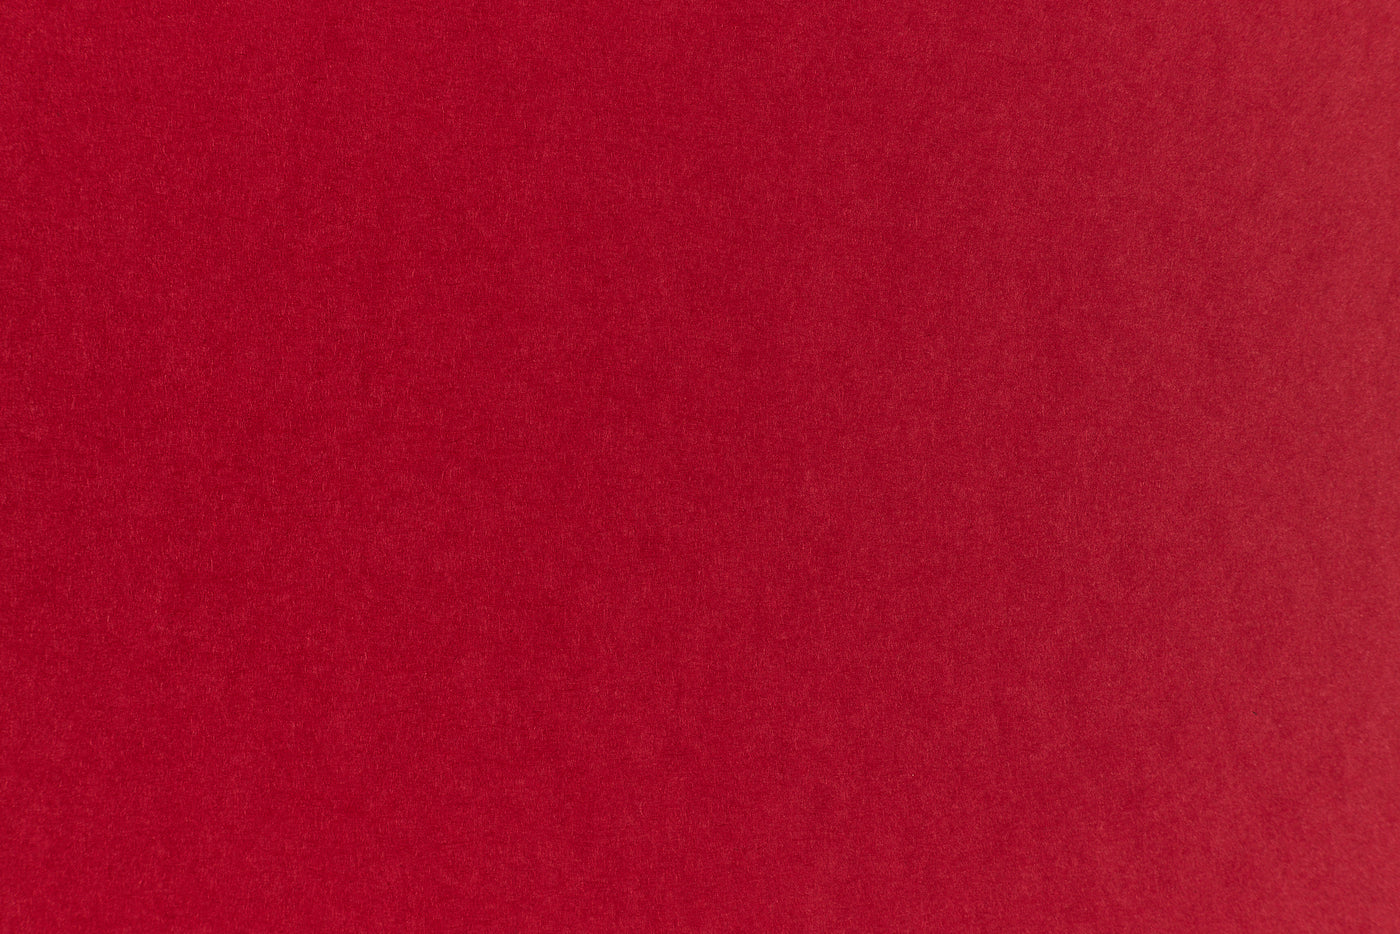 Brilliant red construction-style cardstock in close detail. 